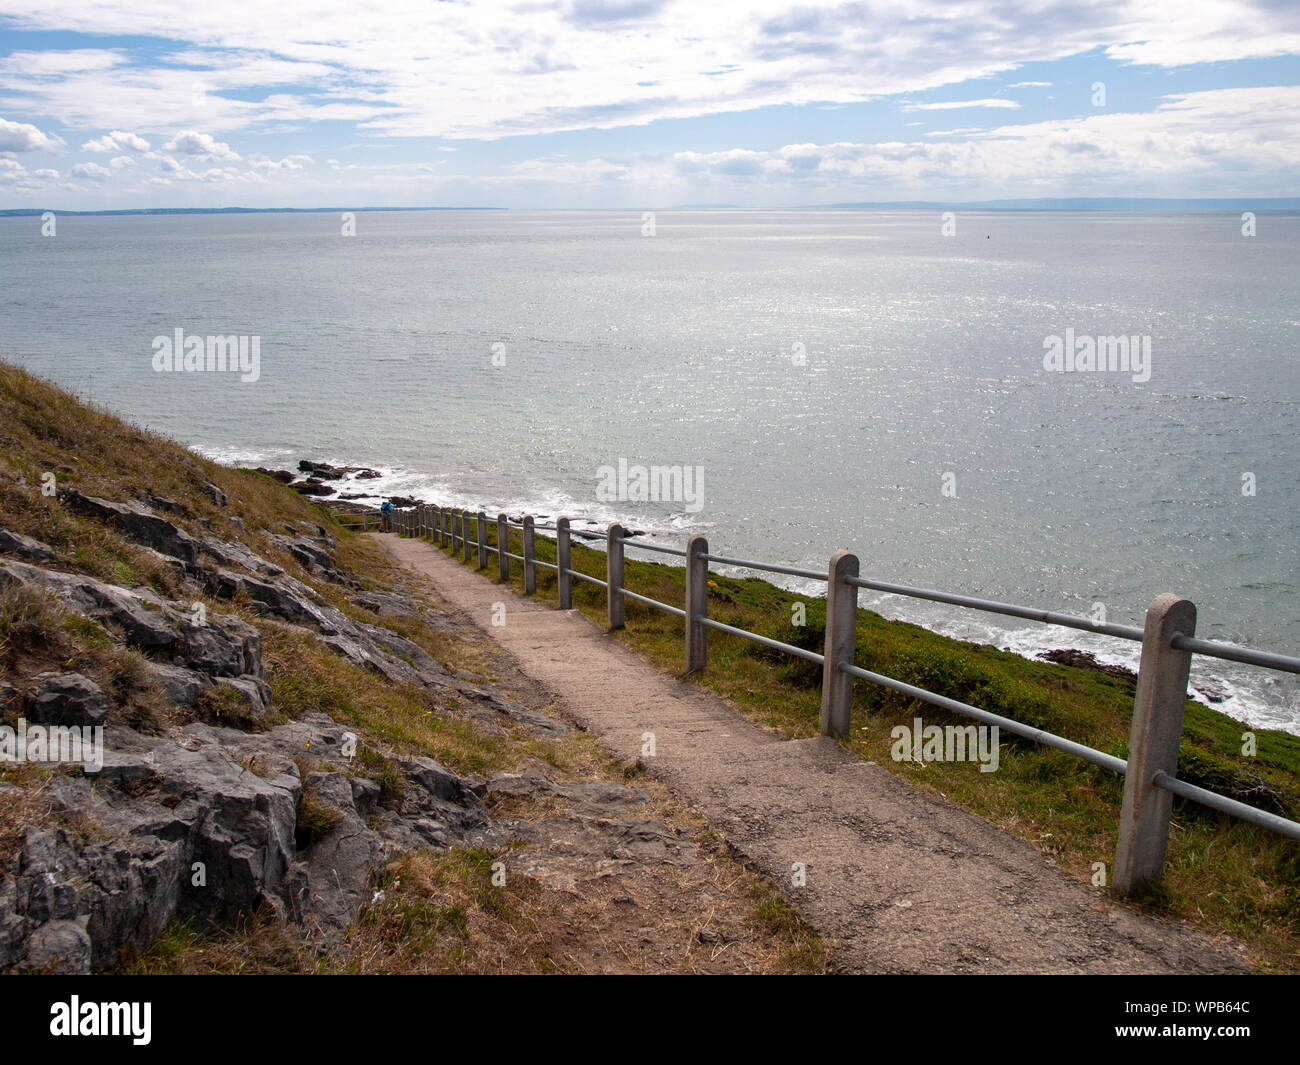 A view looking east on the coastal footpath on Gower with Devon on the horizon, between Limeslade and Rotherslade Bay, Swansea, Wales, UK. Stock Photo